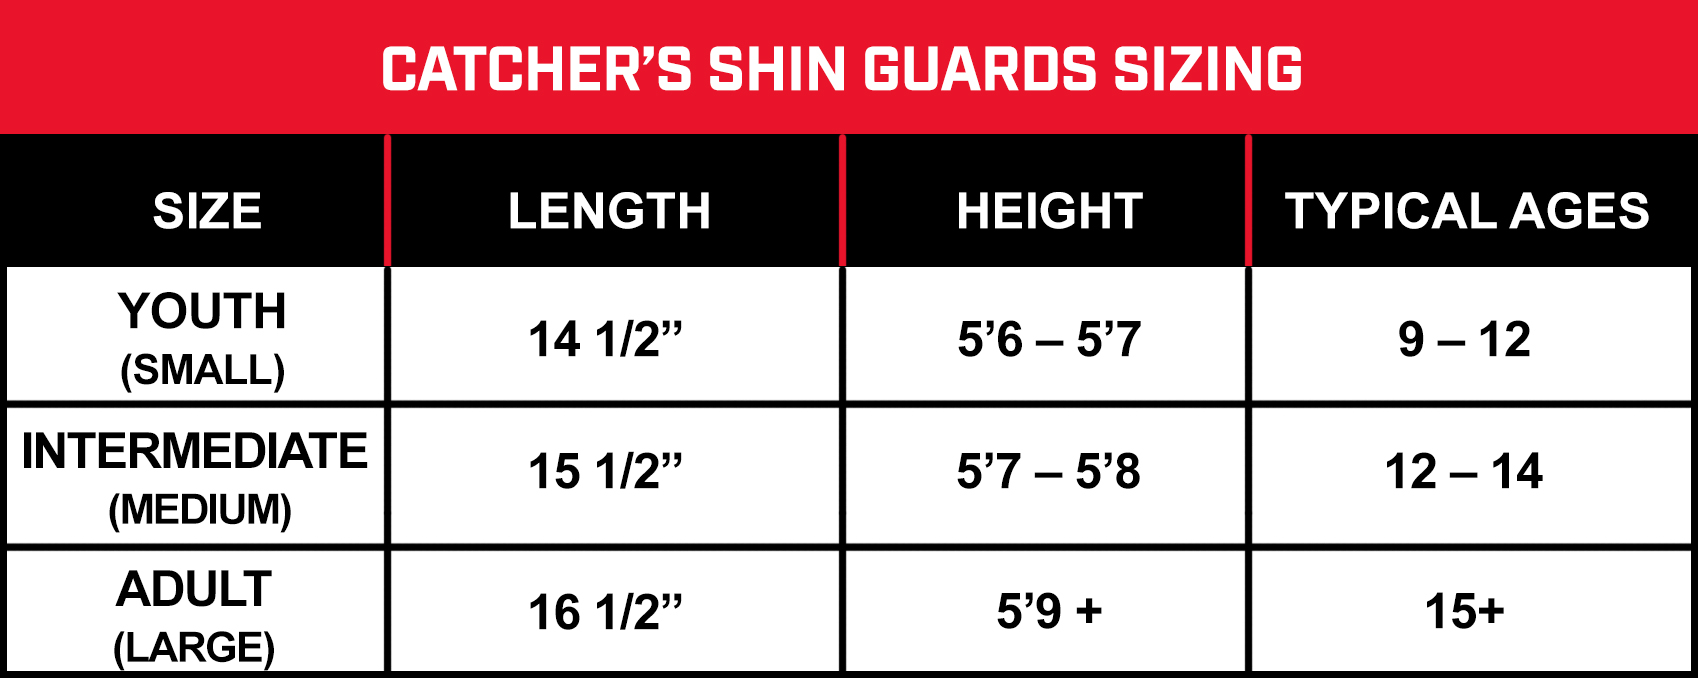 SizingChart-Chest_Protector